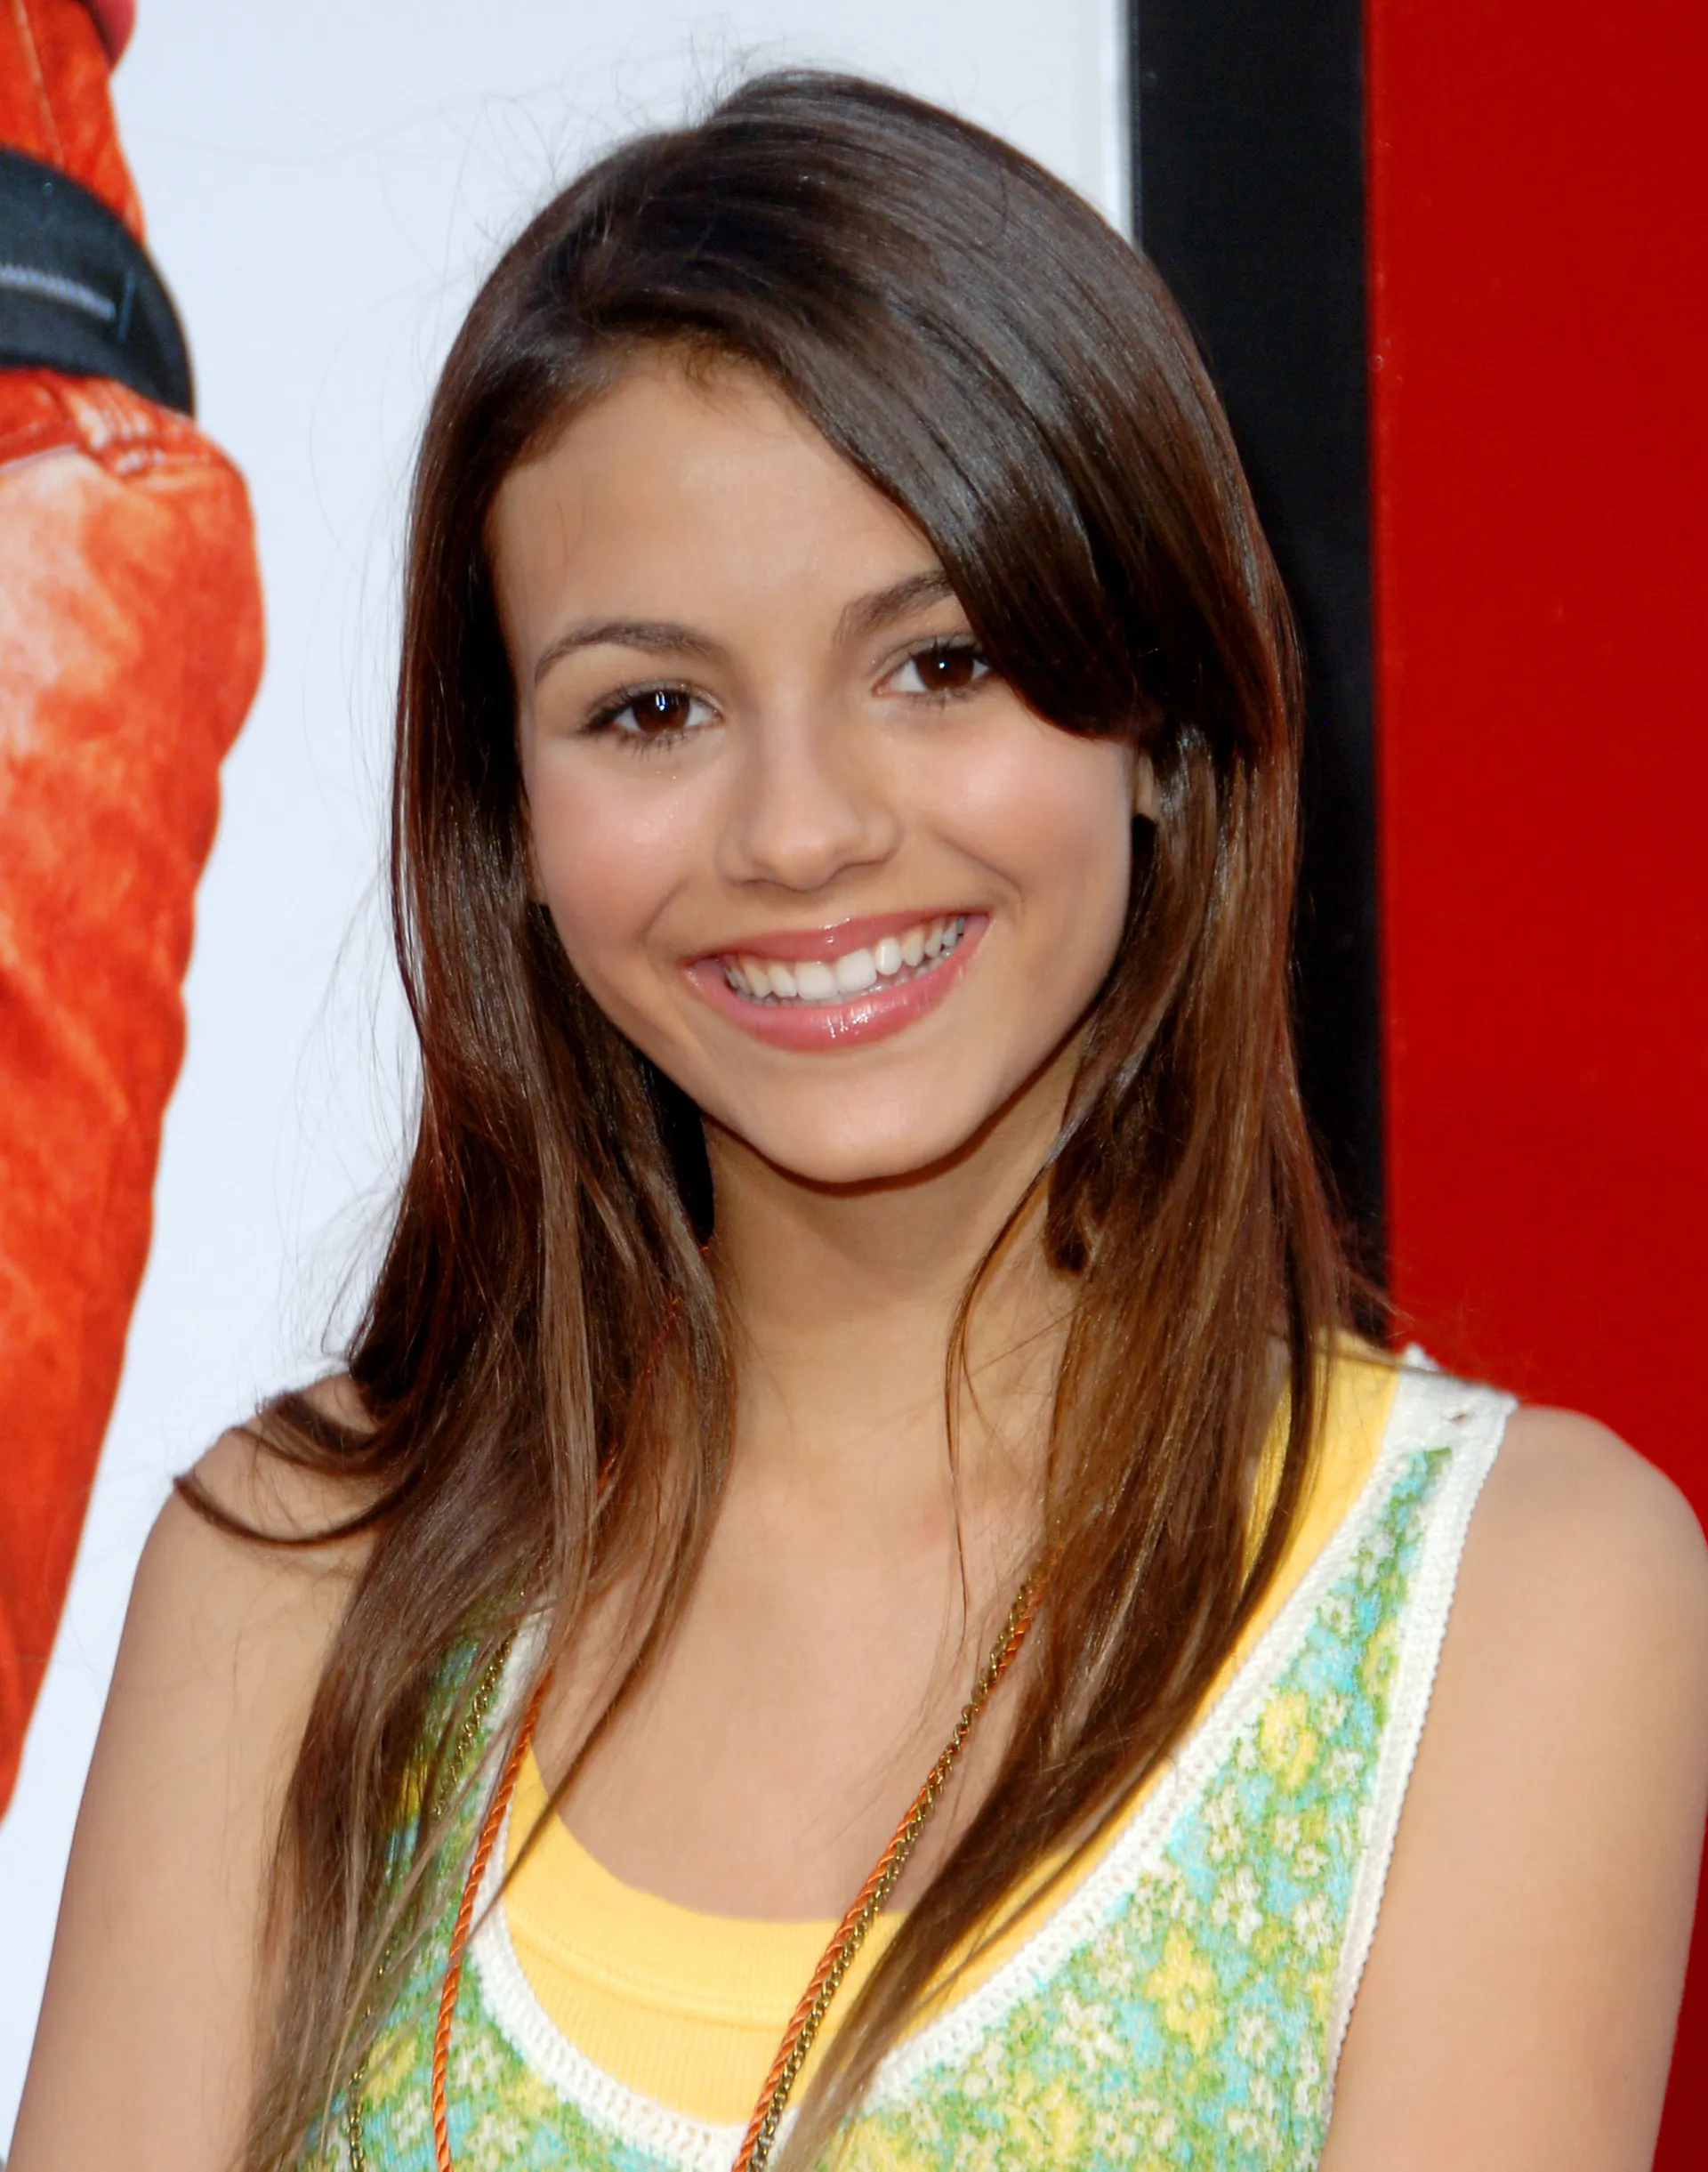 Gettyimages 106041483 Master 1 -Victoria Justice'S Beauty Evolution: From Tween Queen To Timeless Elegance